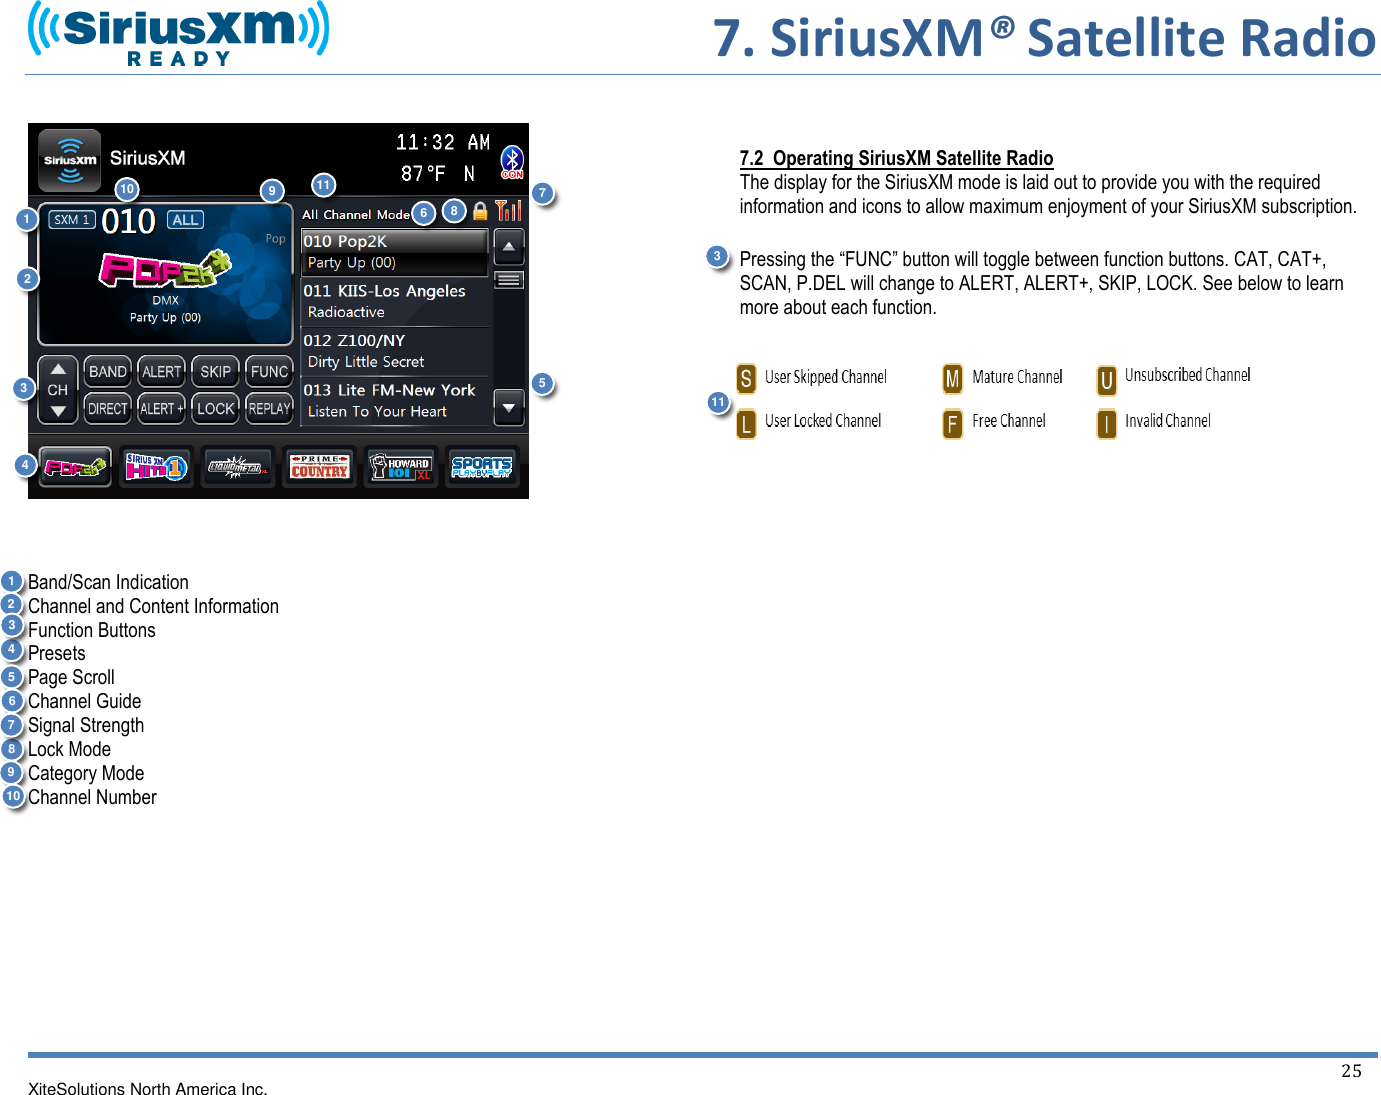     7. SiriusXM® Satellite Radio  XiteSolutions North America Inc.  25       Band/Scan Indication Channel and Content Information Function Buttons Presets Page Scroll Channel Guide Signal Strength Lock Mode Category Mode Channel Number             7.2  Operating SiriusXM Satellite Radio The display for the SiriusXM mode is laid out to provide you with the required information and icons to allow maximum enjoyment of your SiriusXM subscription.  Pressing the “FUNC” button will toggle between function buttons. CAT, CAT+, SCAN, P.DEL will change to ALERT, ALERT+, SKIP, LOCK. See below to learn more about each function.      8 9 10  4 1 2 3 5 6 7 5 11  7 3 1 2 3 4 11  6 8 9 10  